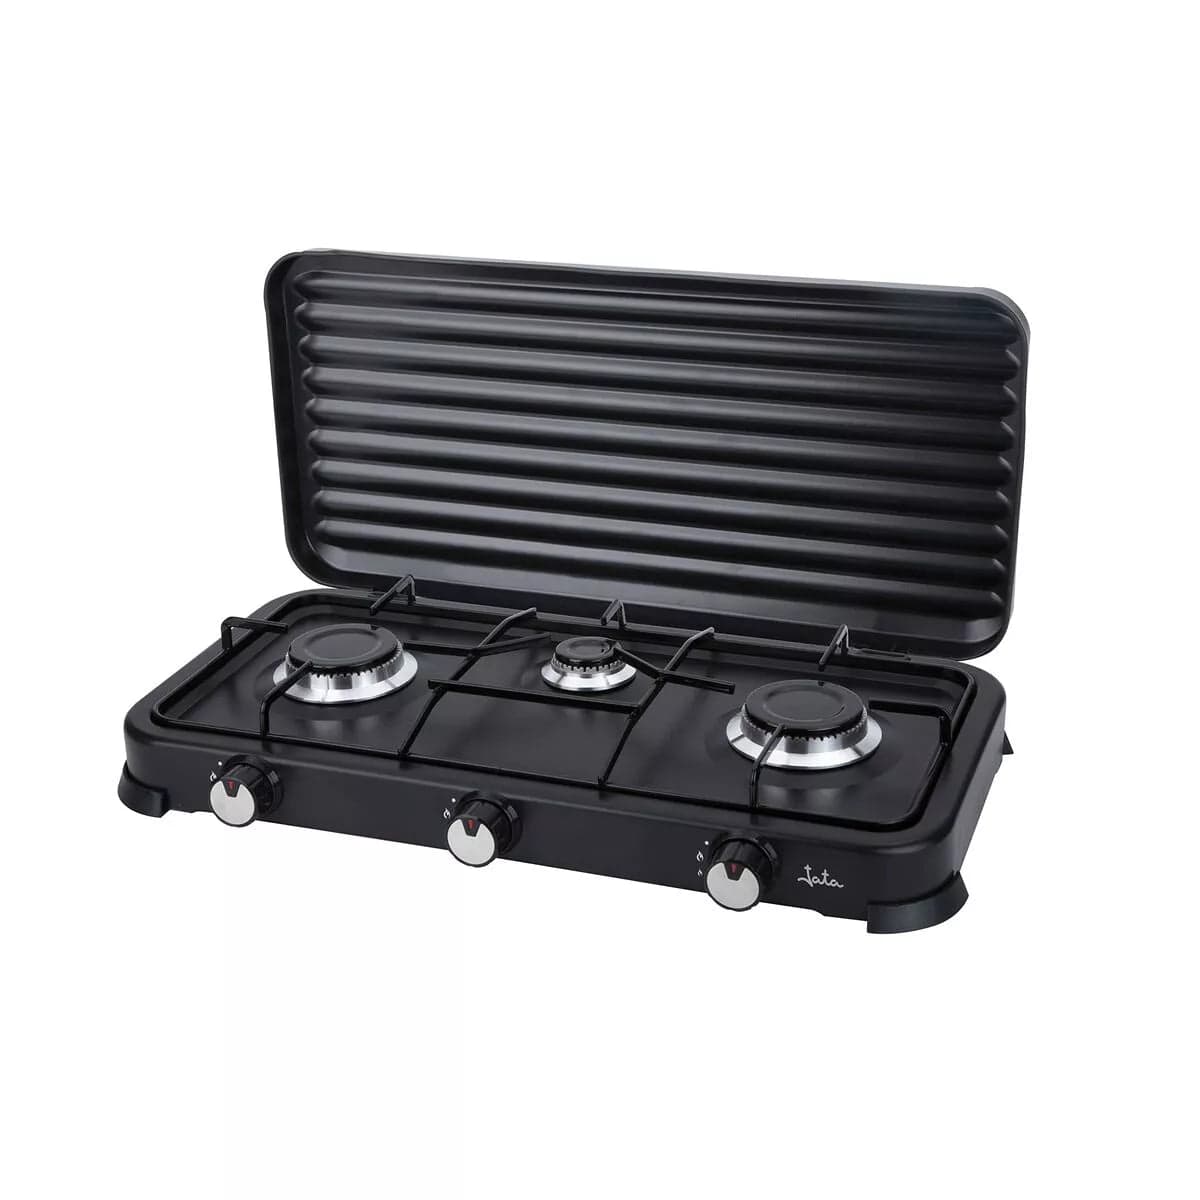 Buy Decakila Triple Burner Gas Stove - KMGS009B in Ghana | Supply Master Kitchen Appliances Buy Tools hardware Building materials